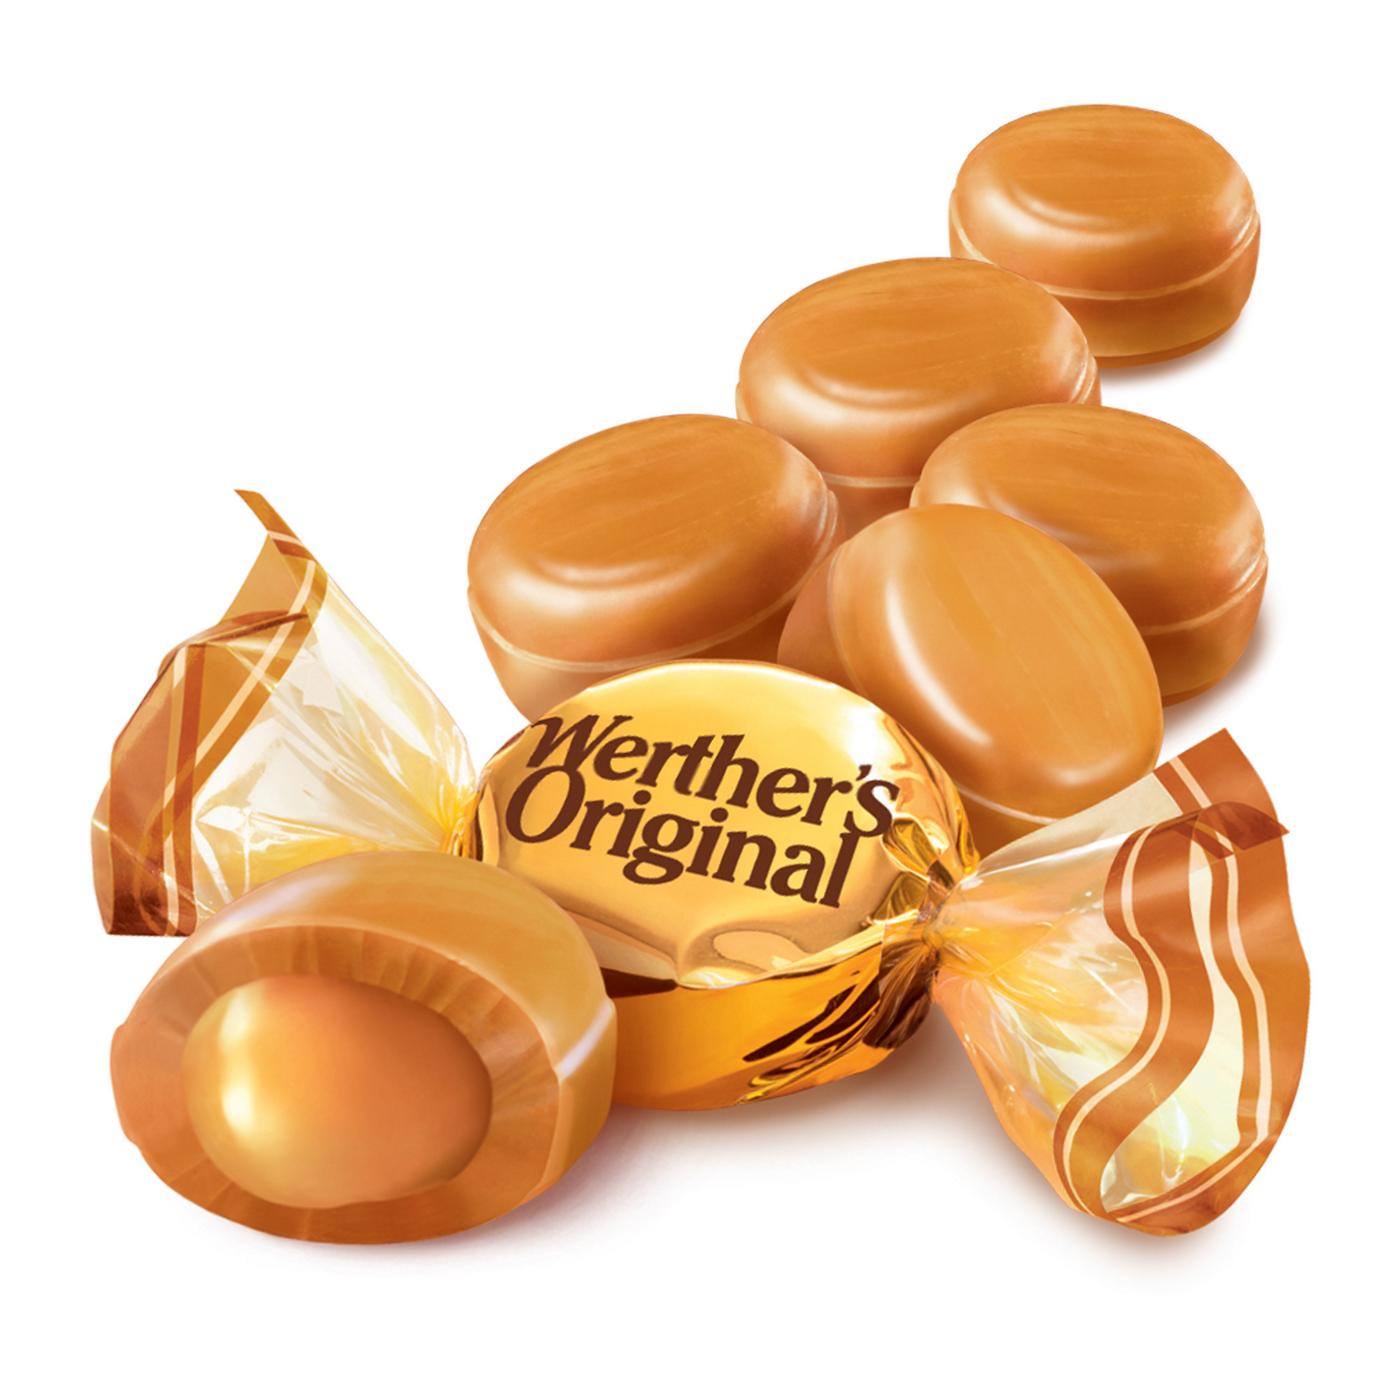 Werther's Original Creamy Caramel Filled Candy; image 5 of 6